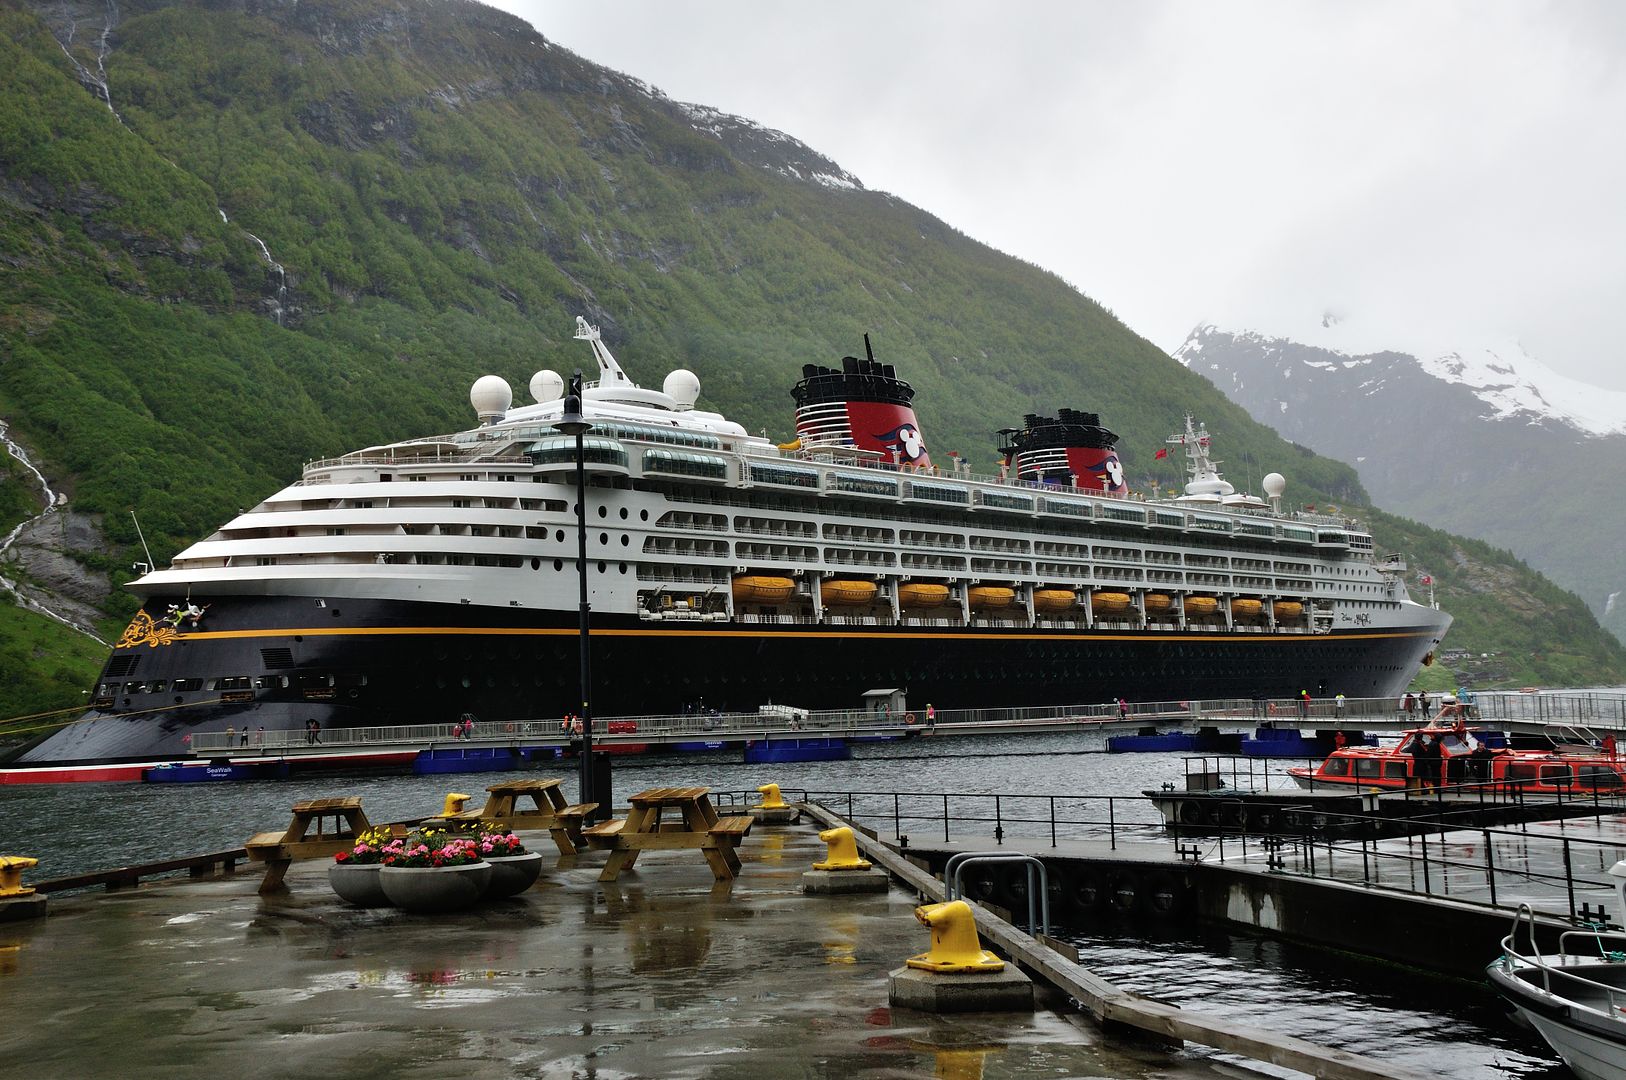 Our Magical "Fjords, Vikings and Castles" Norway Cruise June 2015 w